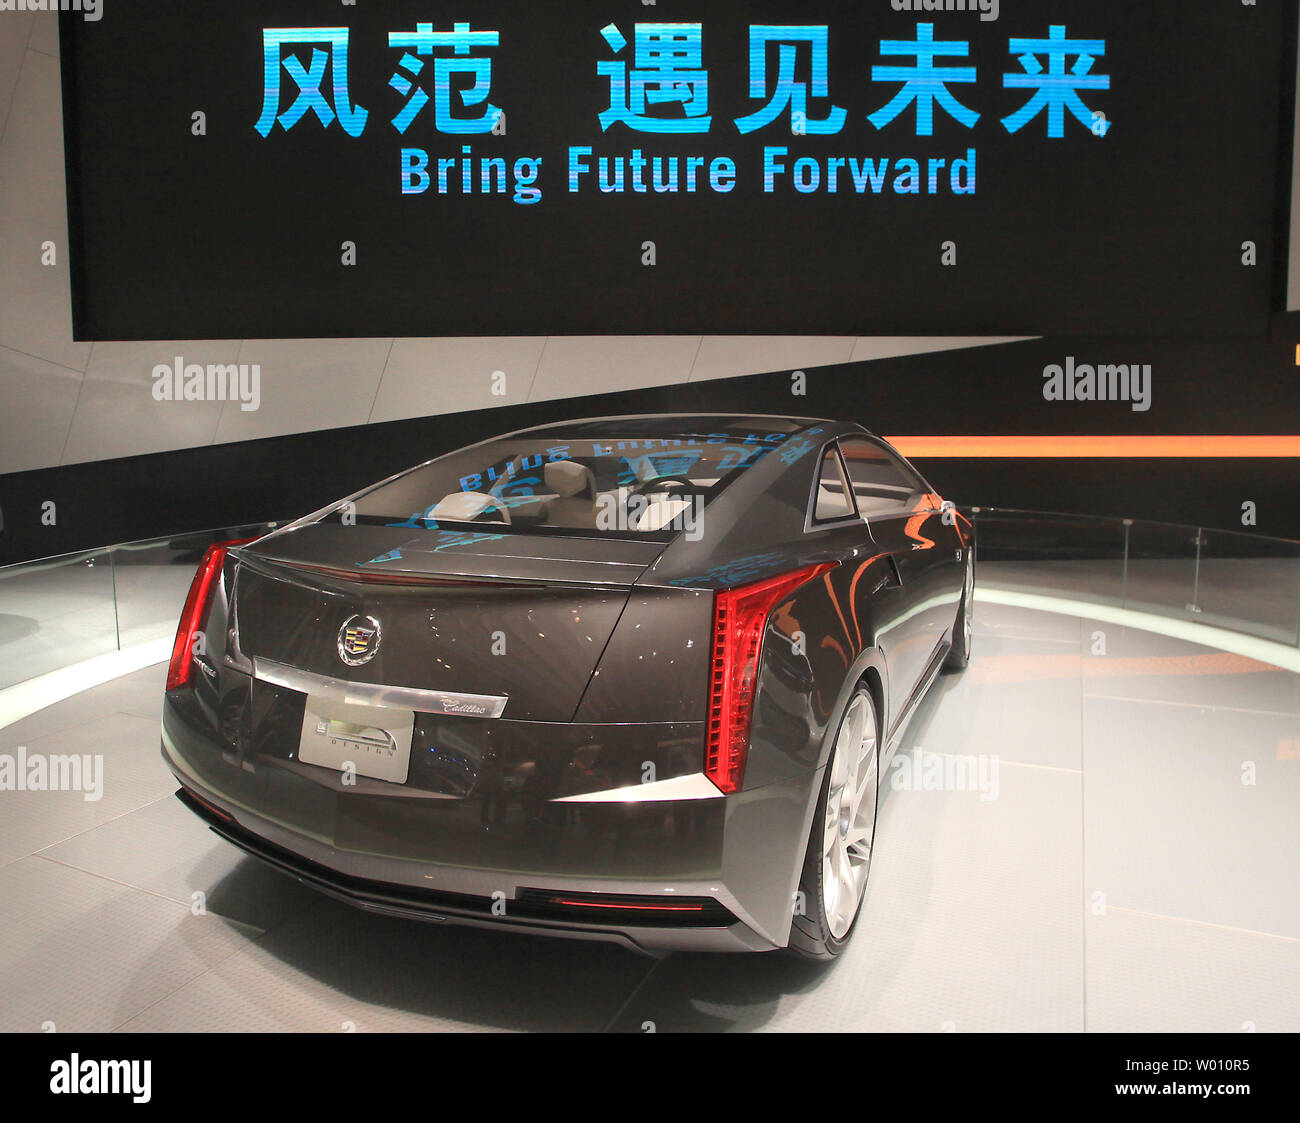 Cadillac unveils the ELR concept sports car during a pre-Opening day show at the world's biggest automobile show being held in Beijing on April 25, 2012.   China is the world's largest automobile and parts market, with international car makers setting up massive plants and dealerships across the country in hopes of gaining a share of the fast growing domestic market.    UPI/Stephen Shaver Stock Photo